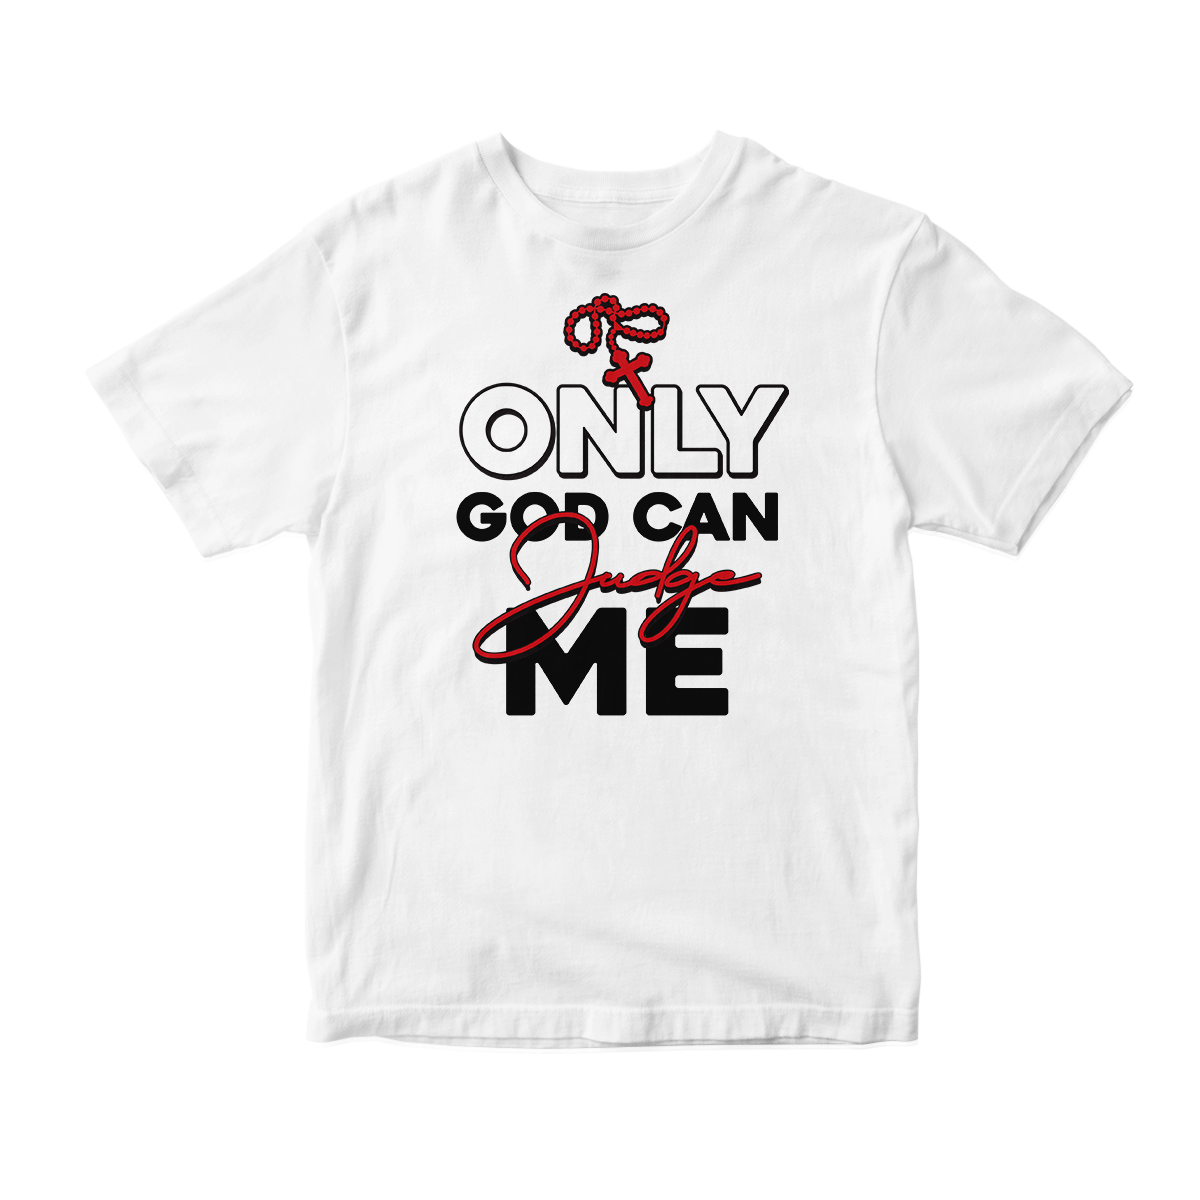 'Only God Can Judge Me' in Gym Red CW Unisex Short Sleeve Tee